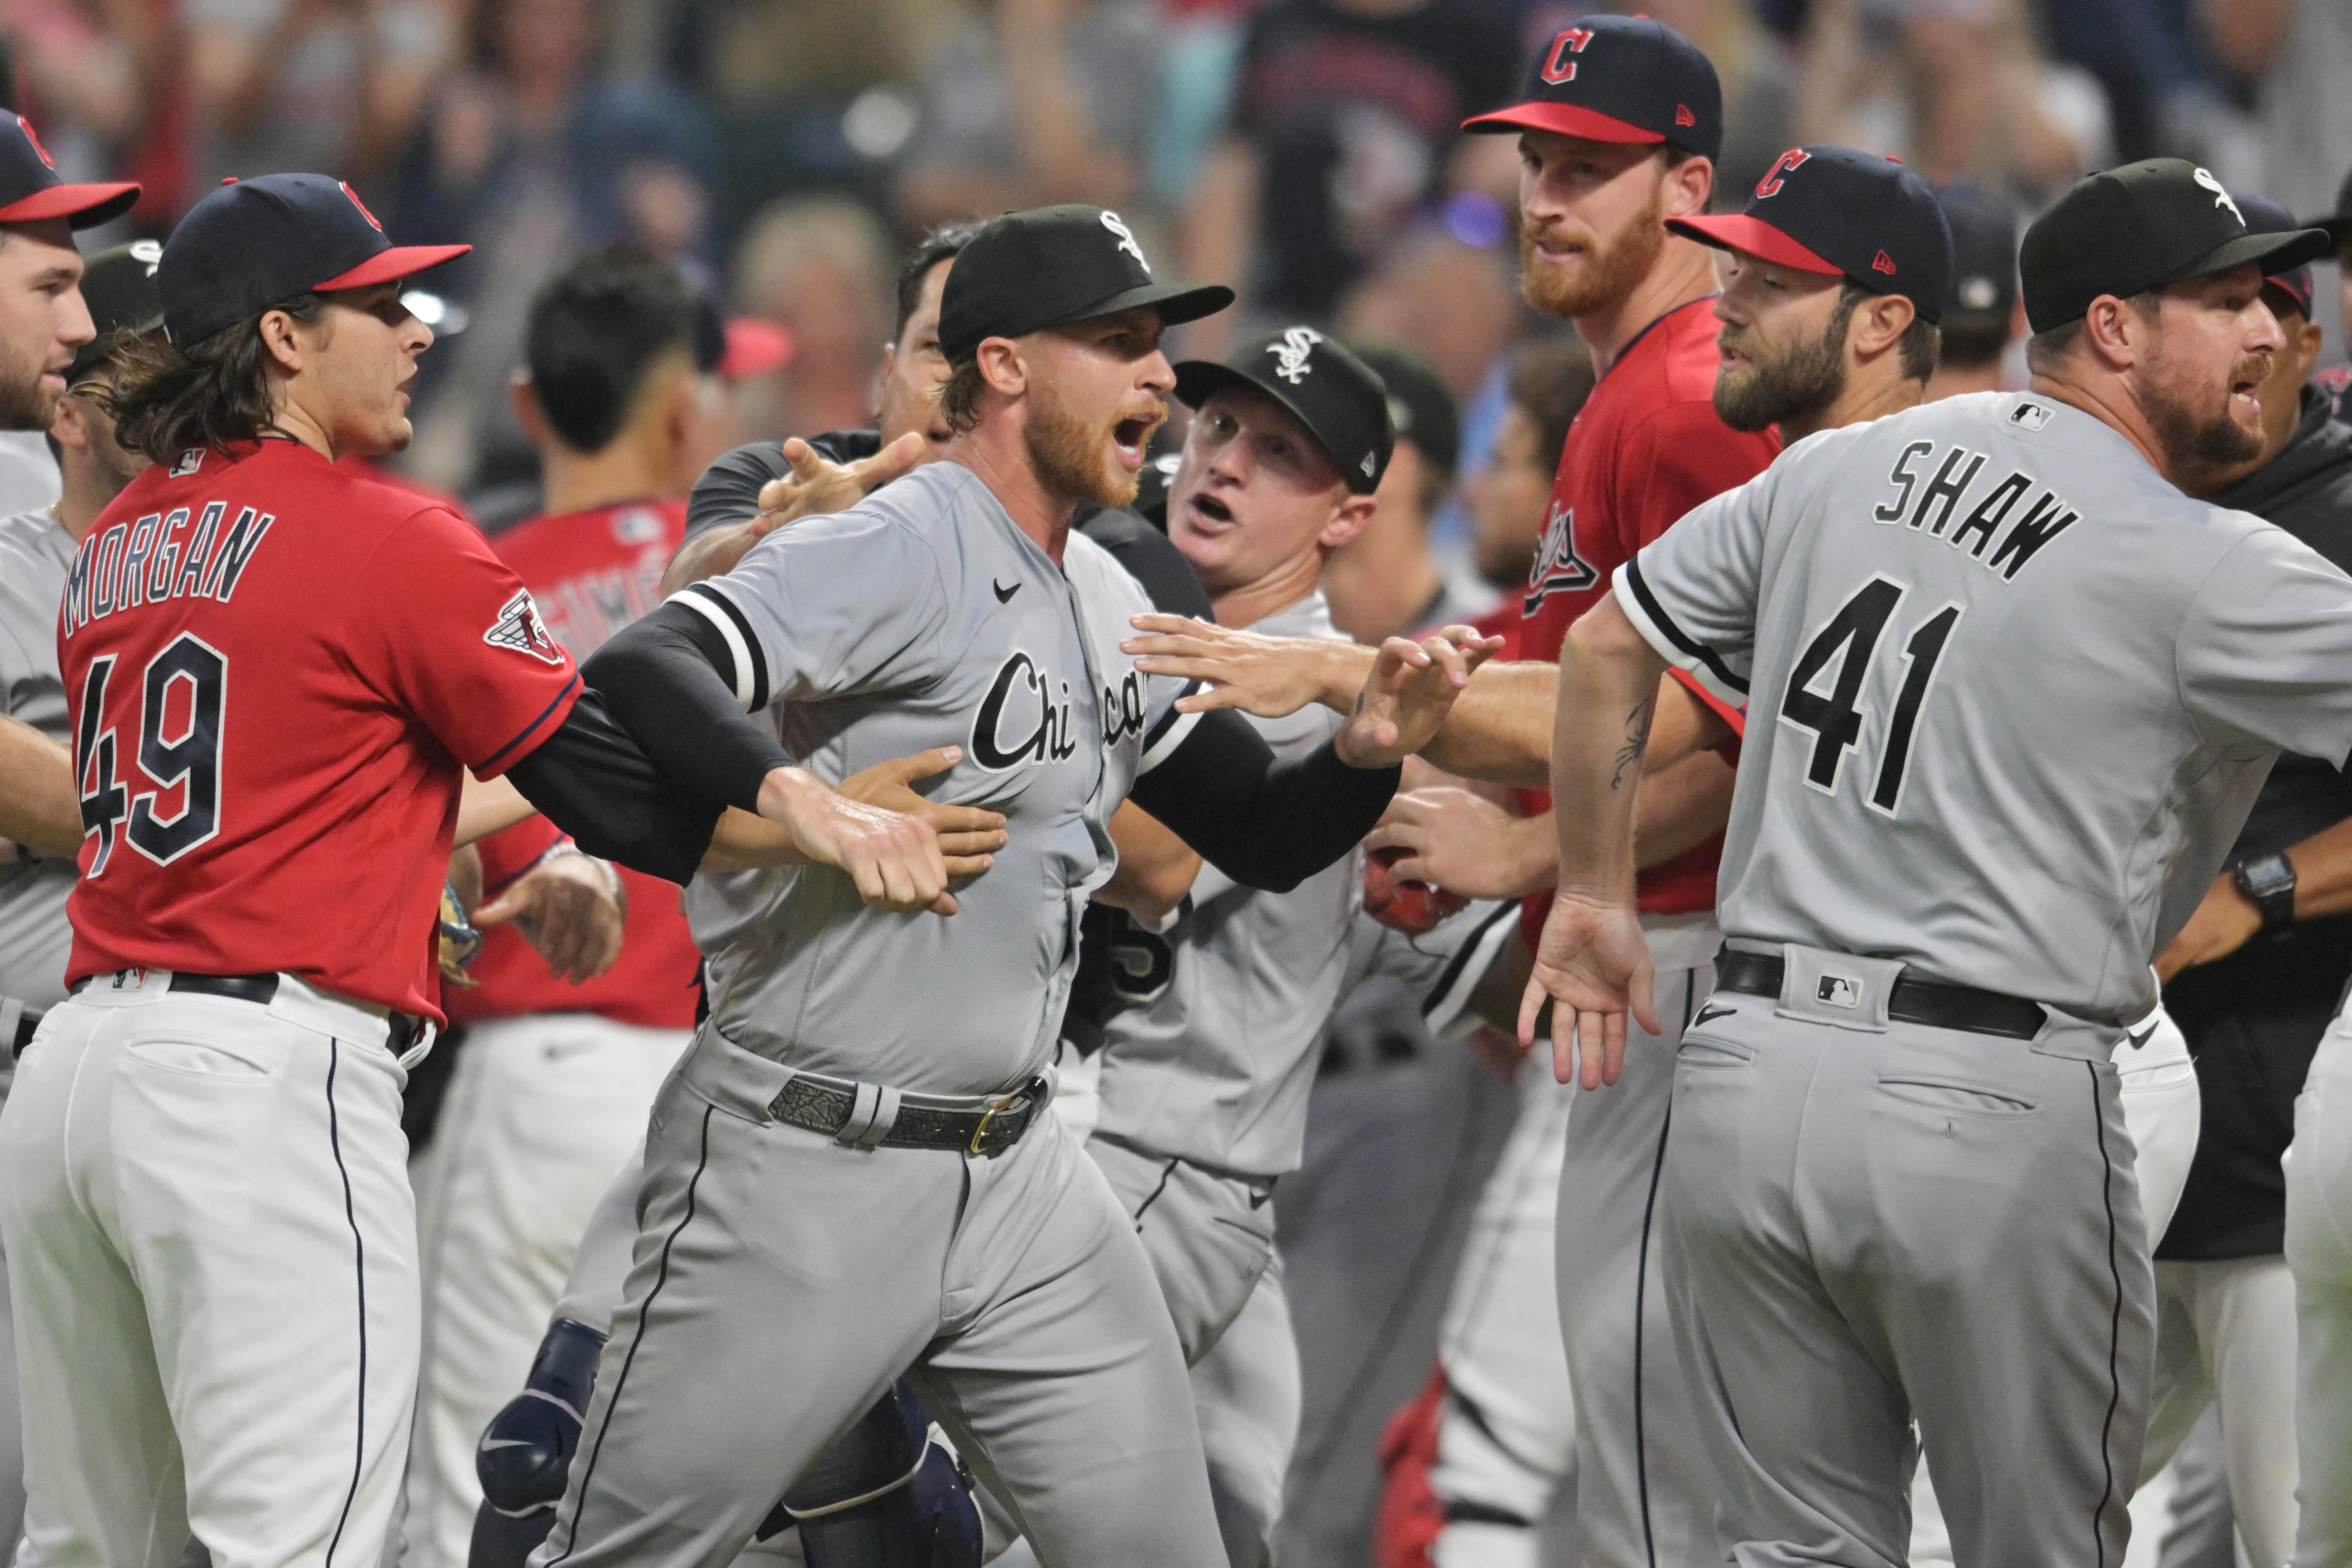 What happened in the Nationals game against White Sox? Benches